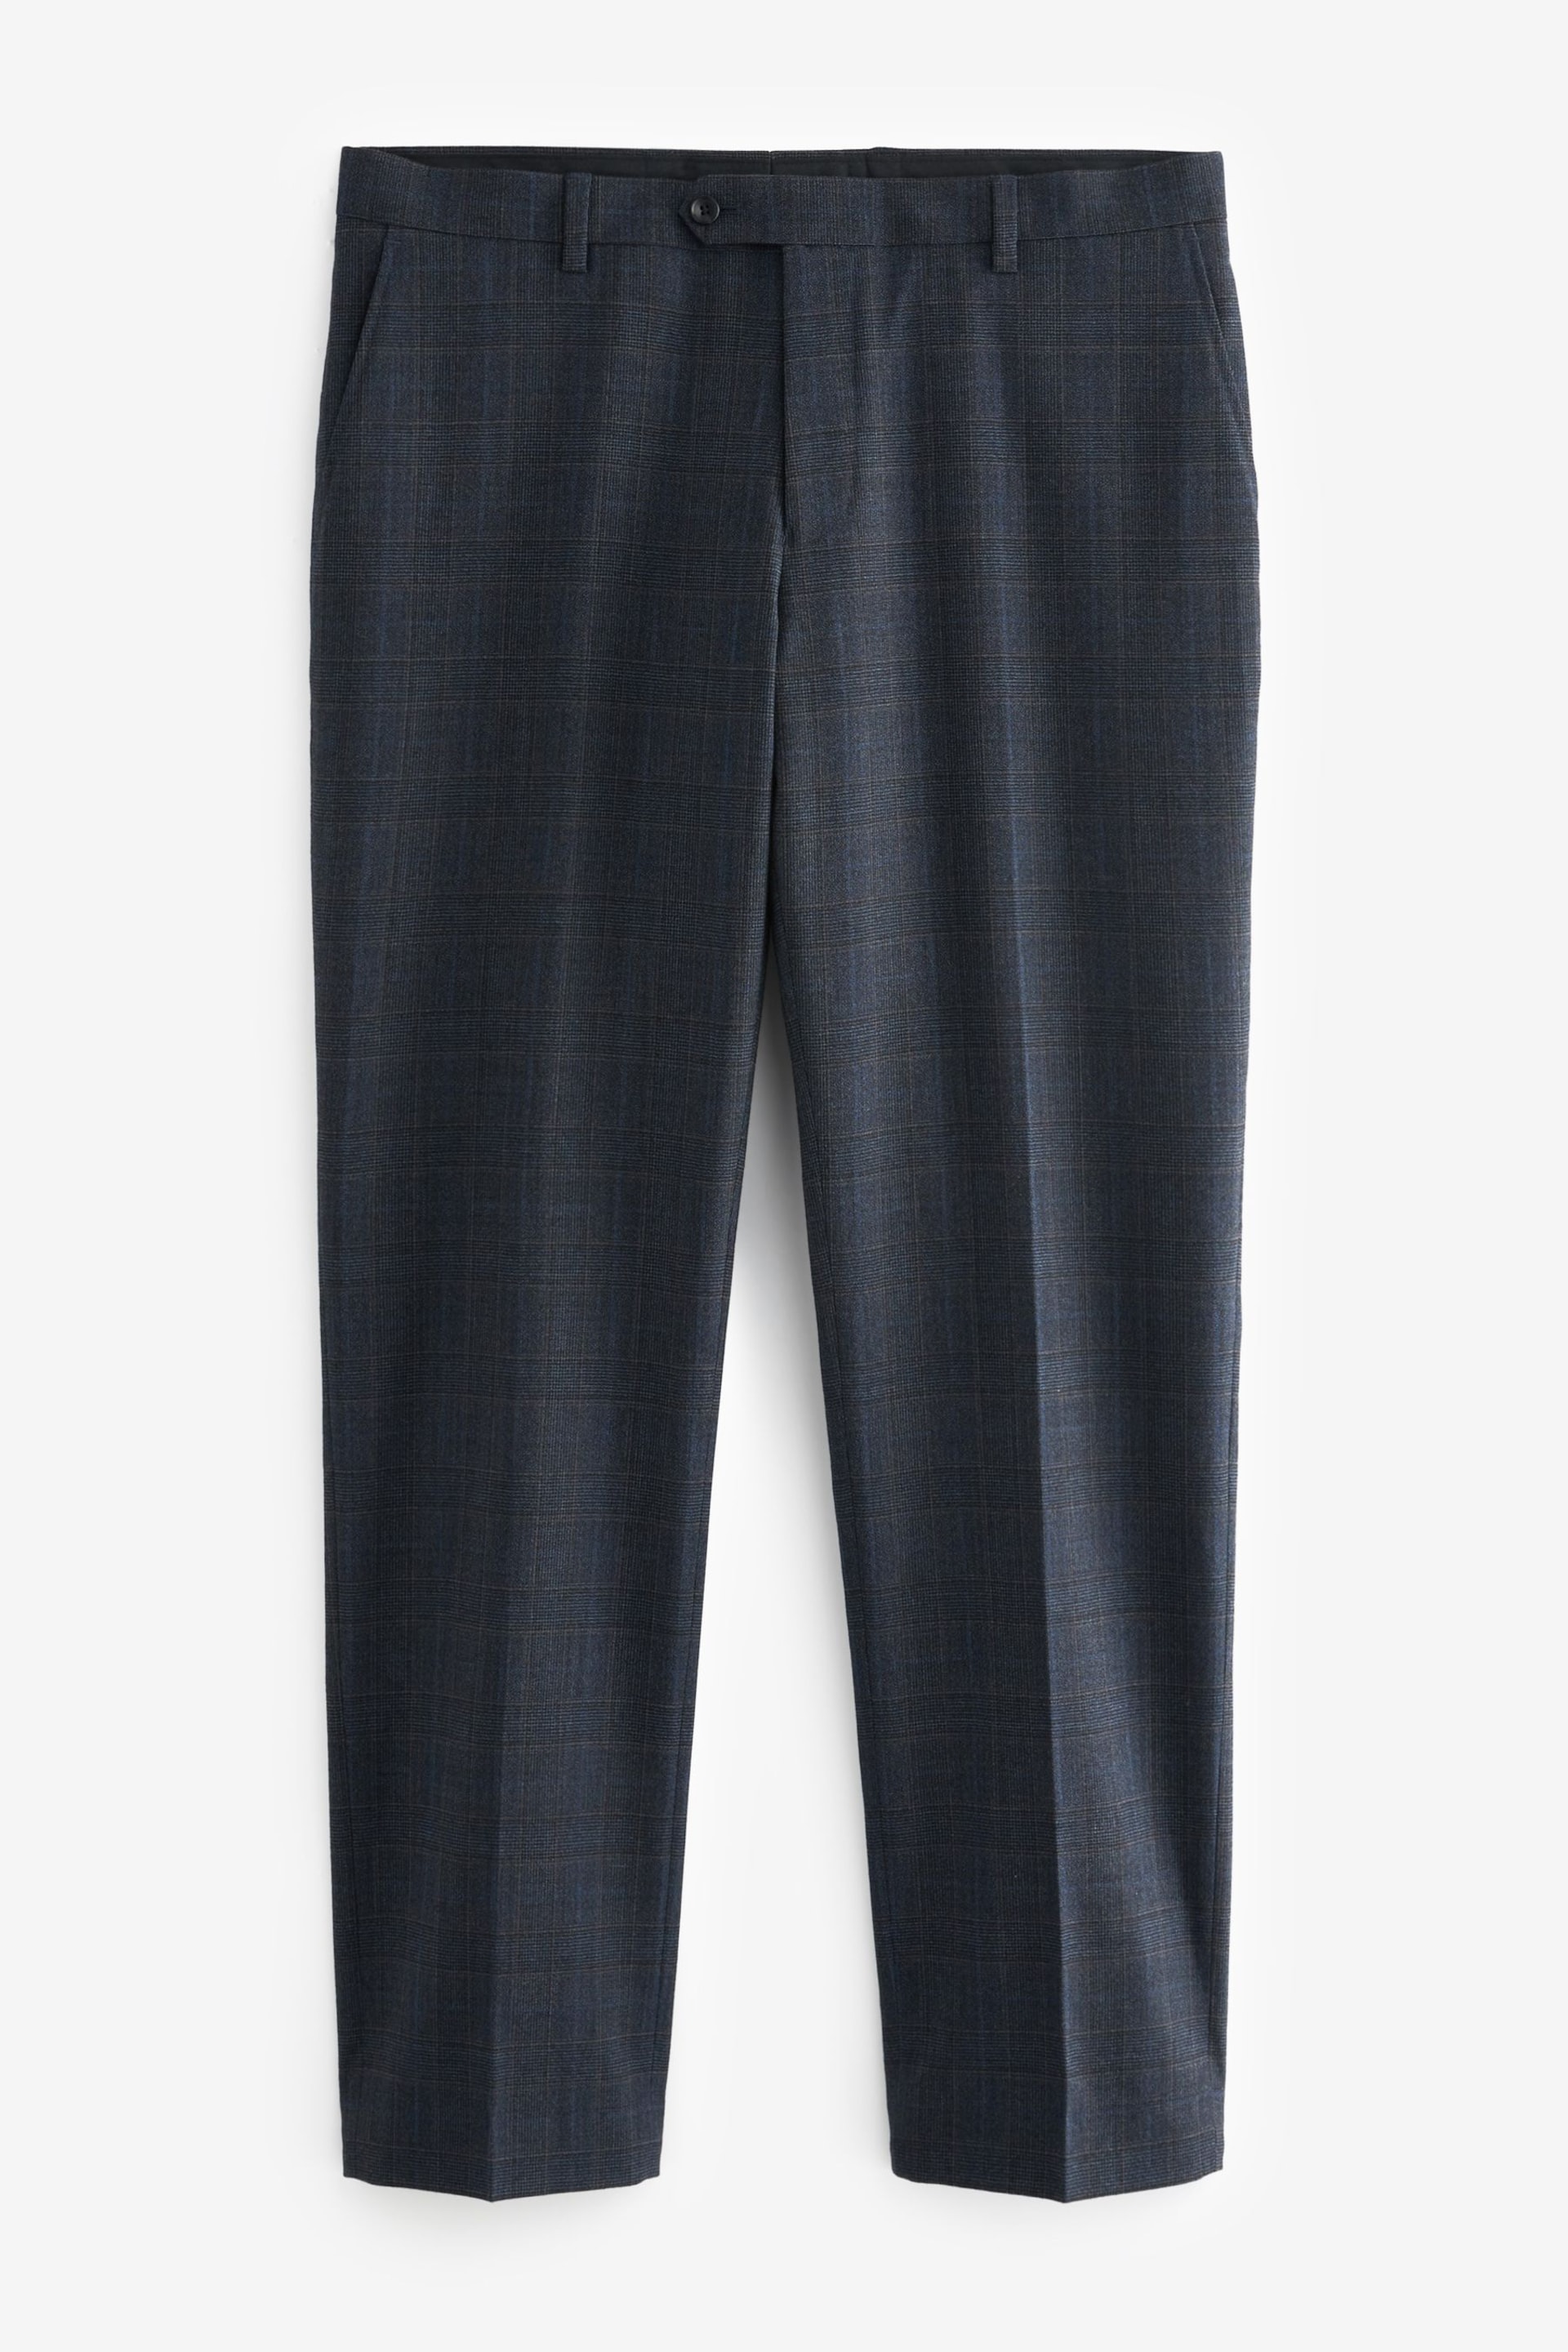 Blue Regular Fit Check Signature Suit: Trousers - Image 7 of 11